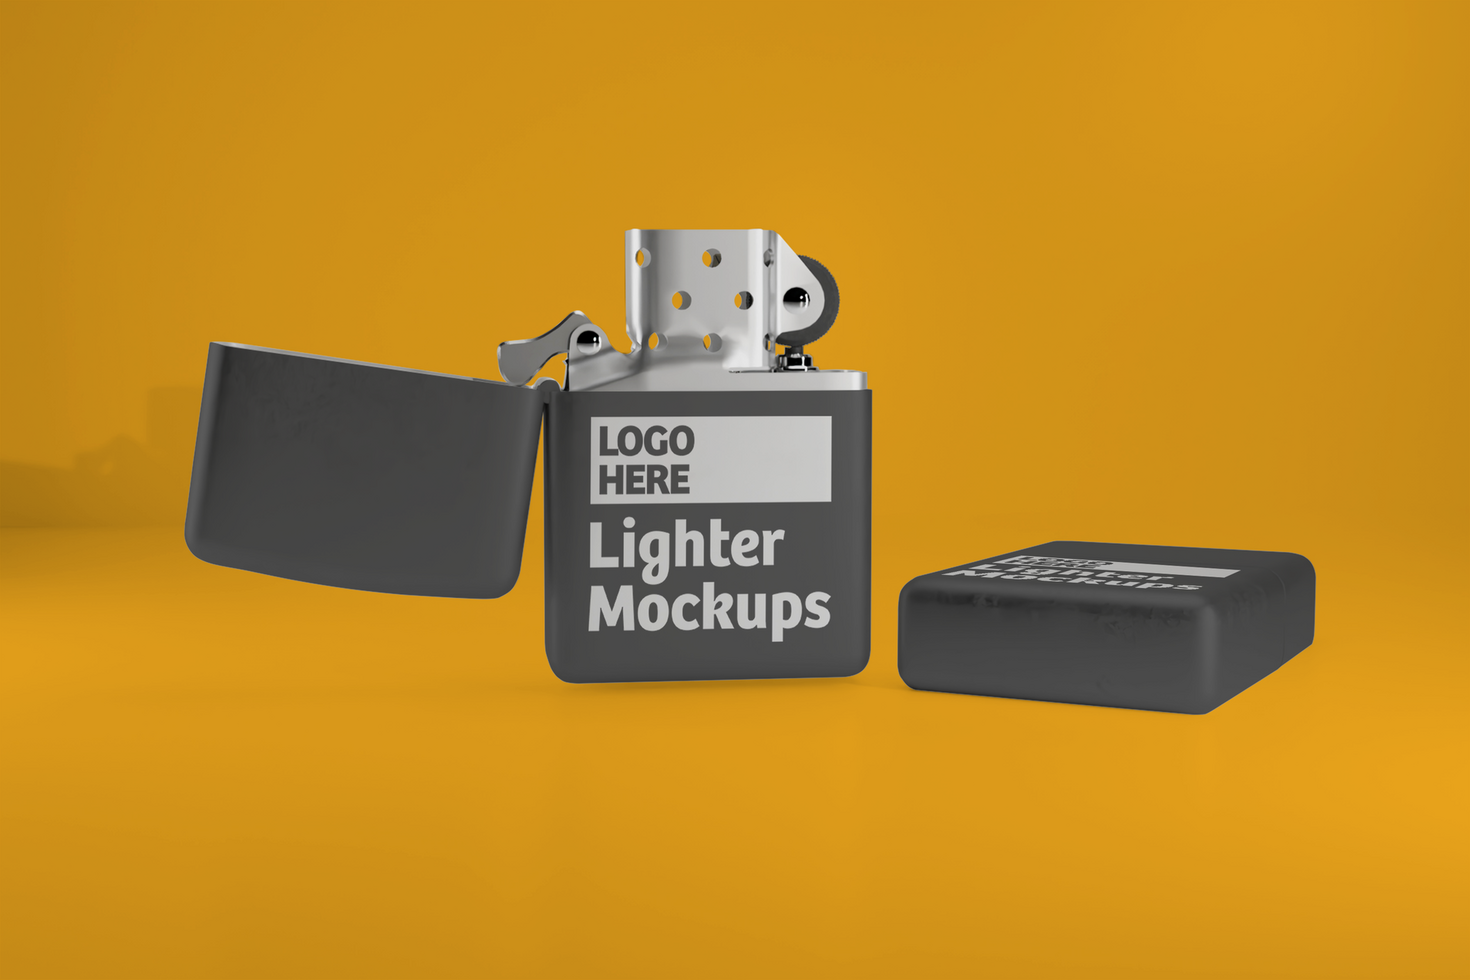 Stainless steel lighter, opened and closed mockup design psd